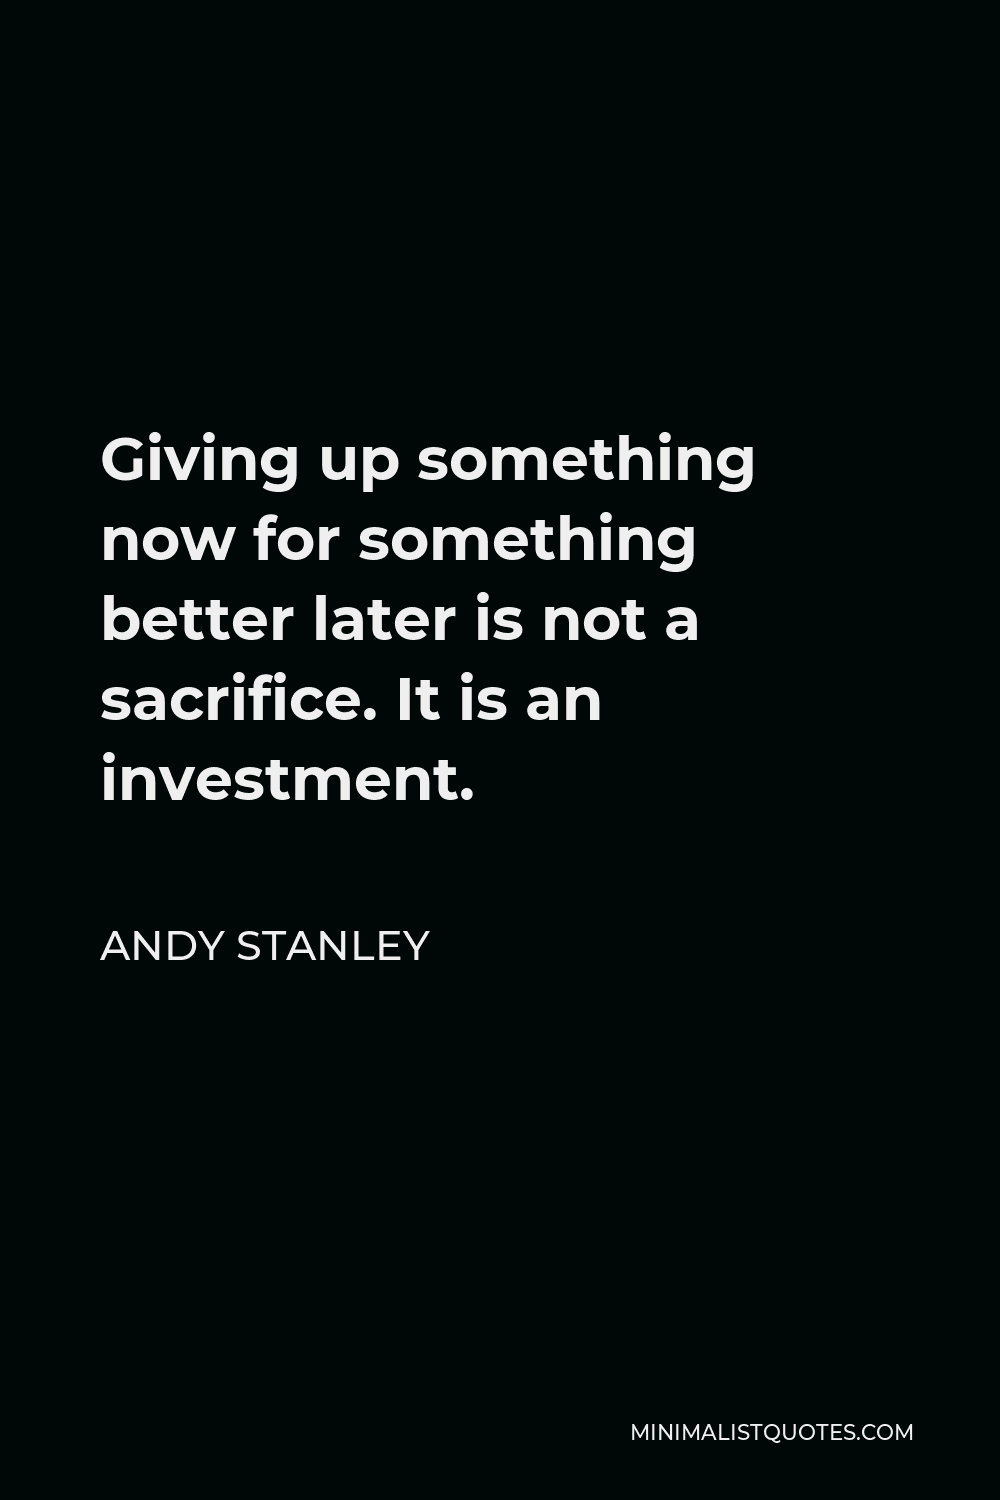 Andy Stanley Quote - Giving up something now for something better later is not a sacrifice. It is an investment.